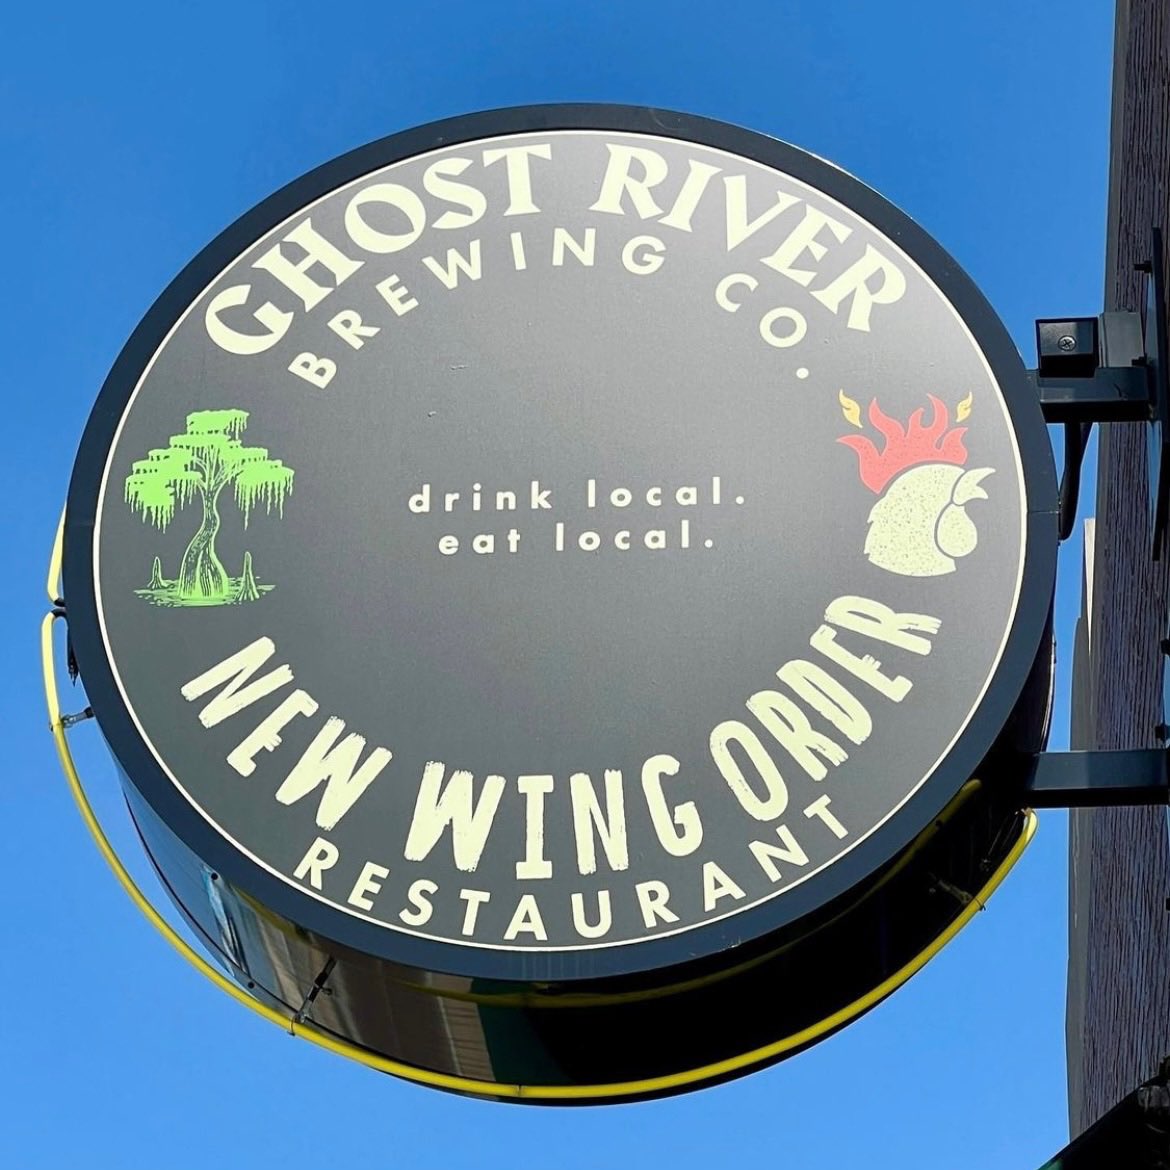 The restaurant (341 Beale St) 12:00-10:00pm and the @GhostRiverBrew taproom and beer garden open until 12:00am today. 

#Choose901 #Memphis #MemphisEats #901Eats #Wings #HotWings #ChickenWings #EatLocal #DrinkLocal #Catering #ILoveMemphis #EdibleMemphis #BestOfMemphis